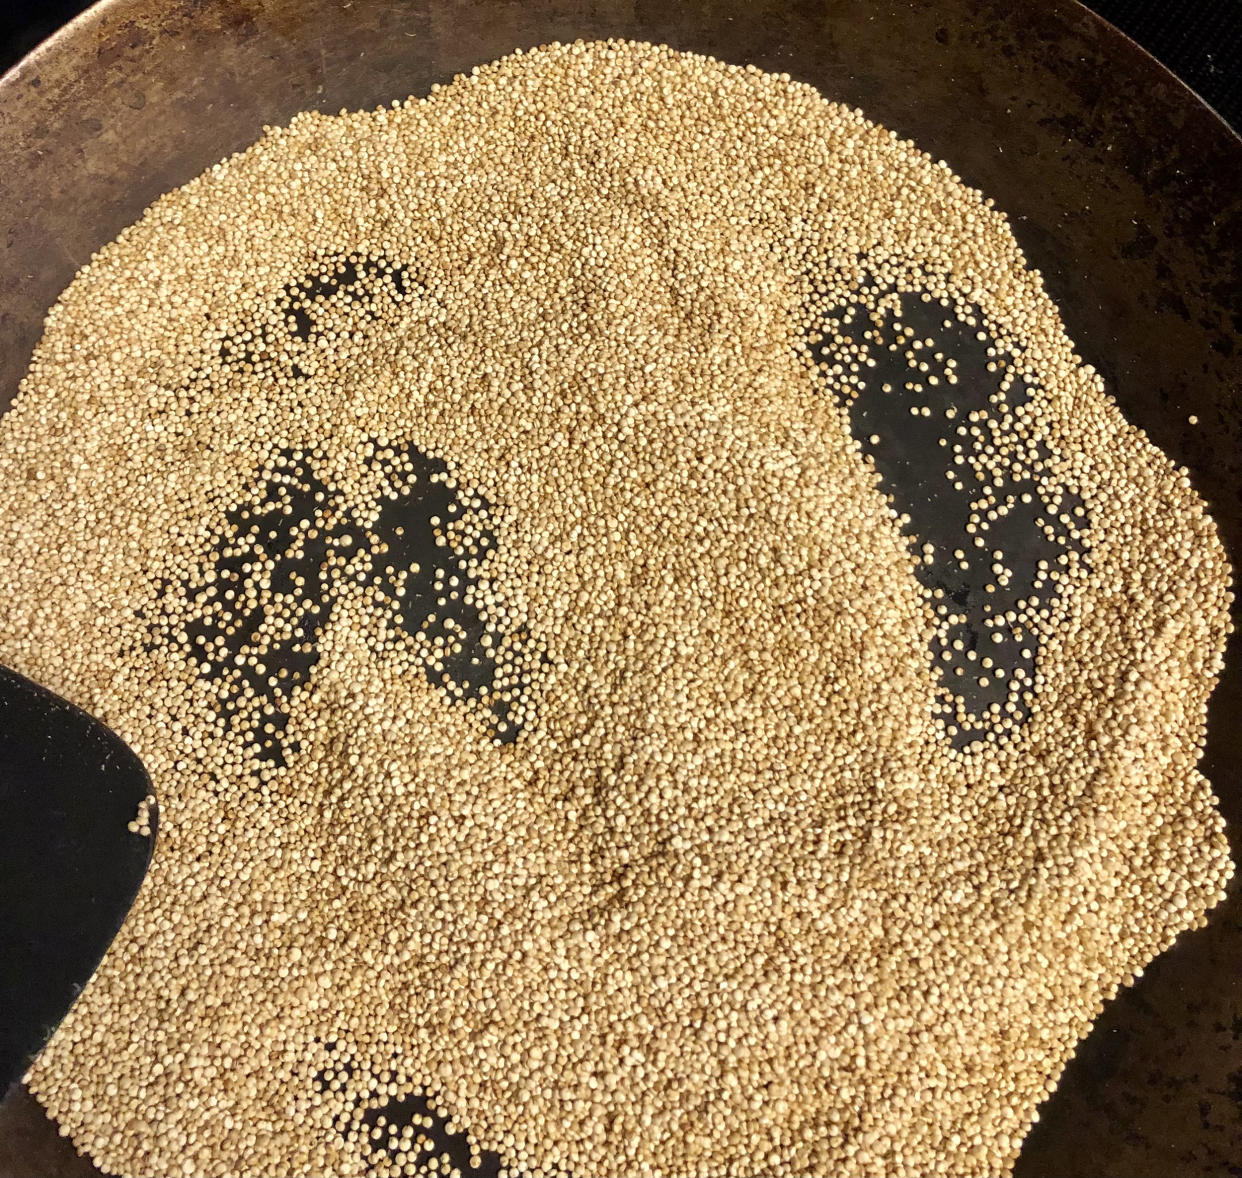 Toasting the quinoa only takes a few minutes, and it’ll tell you when it’s ready. (Heather Martin)